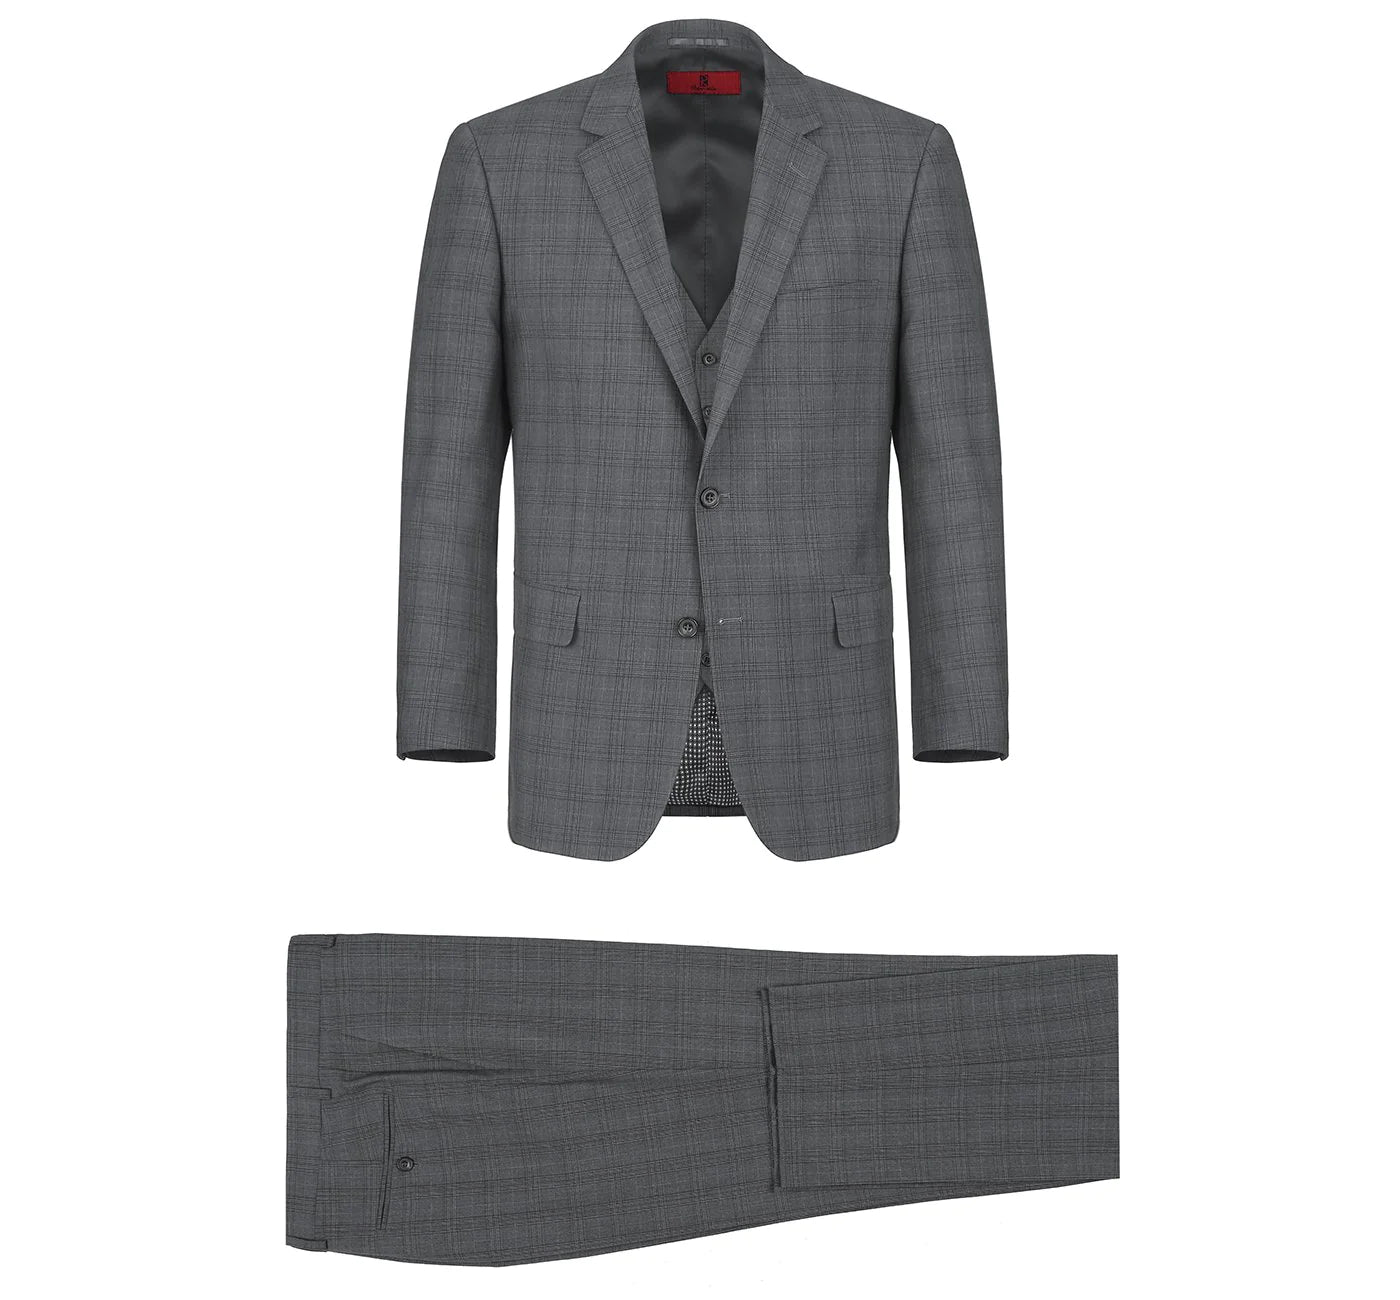 Men's Grey 3-Piece Classic Fit Single Breasted Windowpane Suit